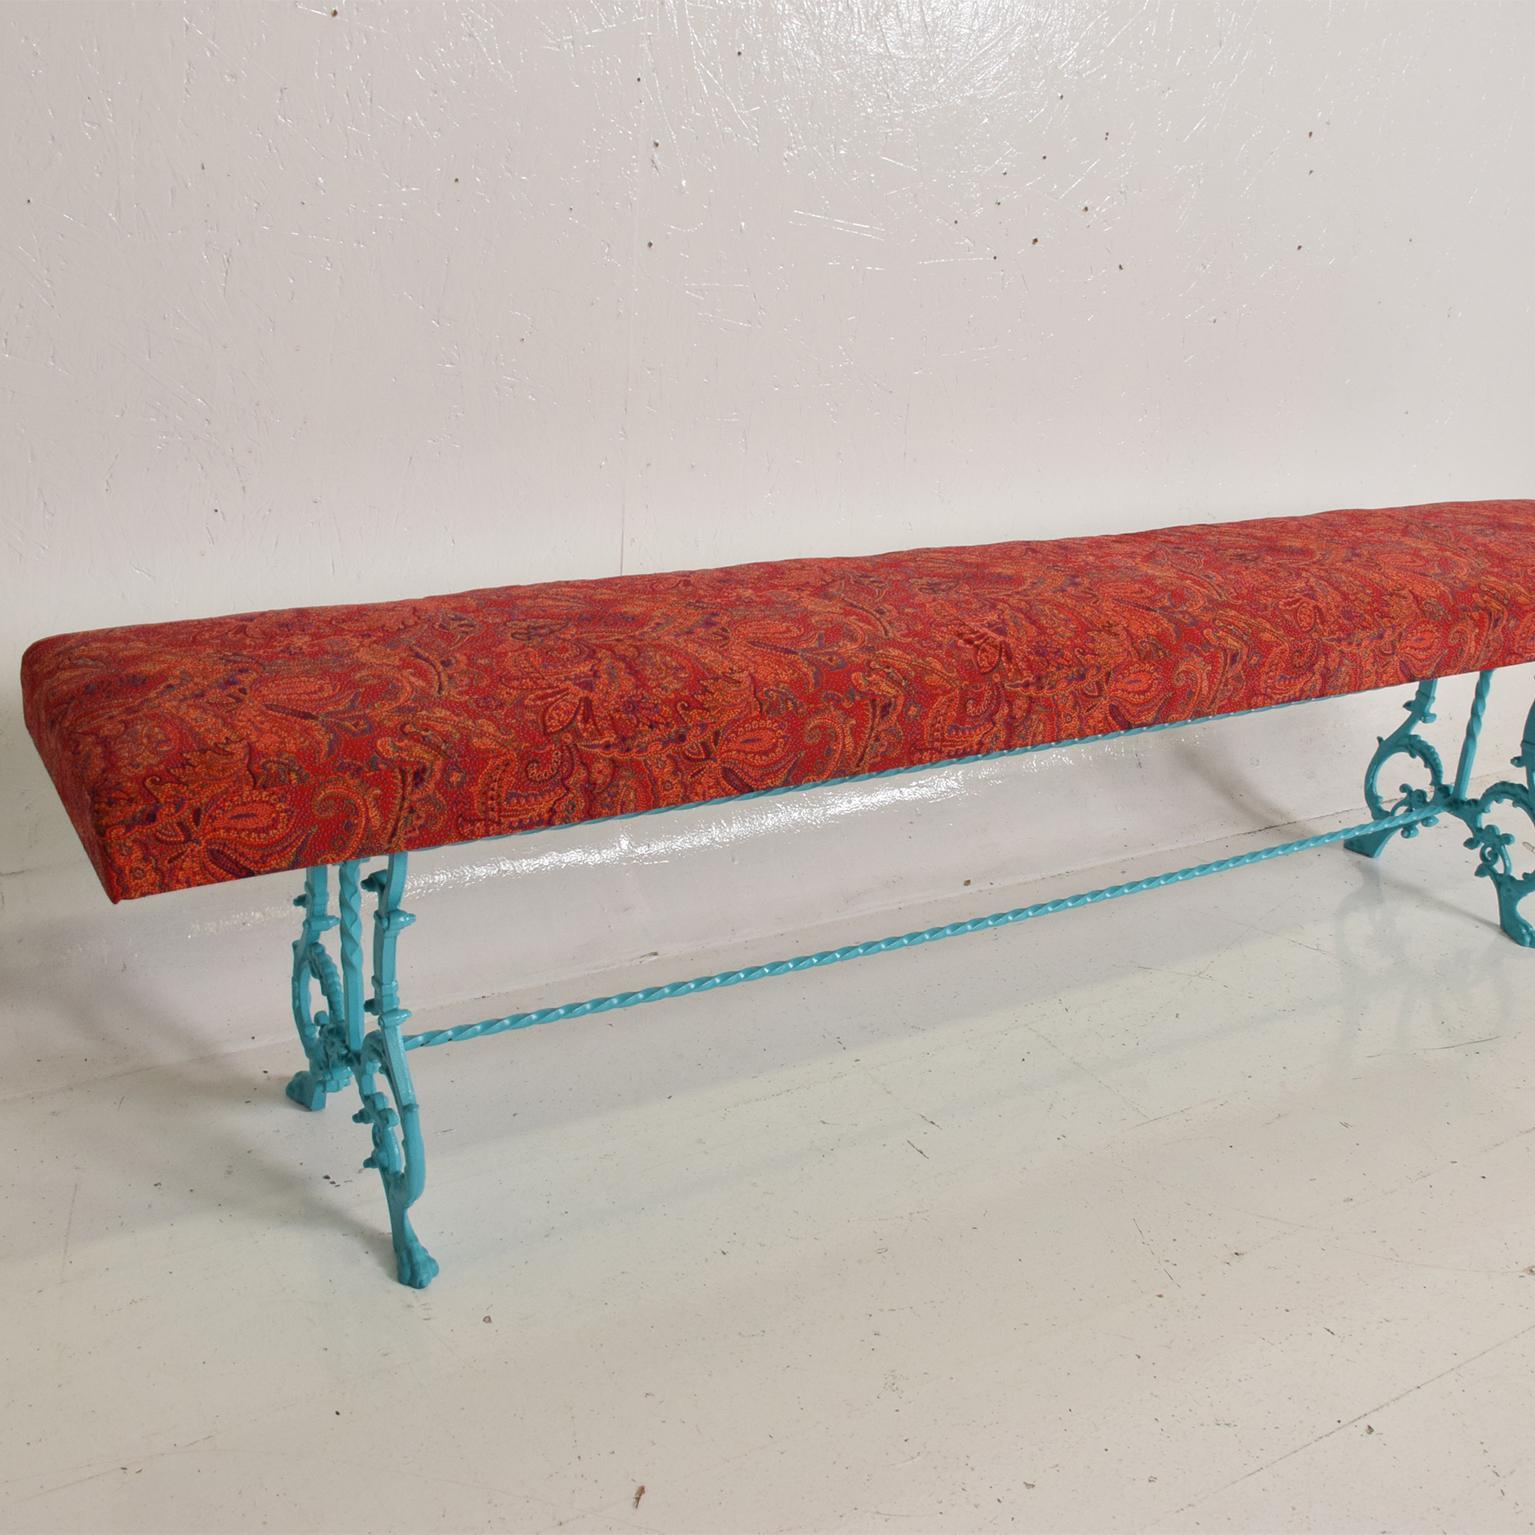 Late 20th Century 1970s Scrolled Wrought Iron Bench New Paisley Upholstery